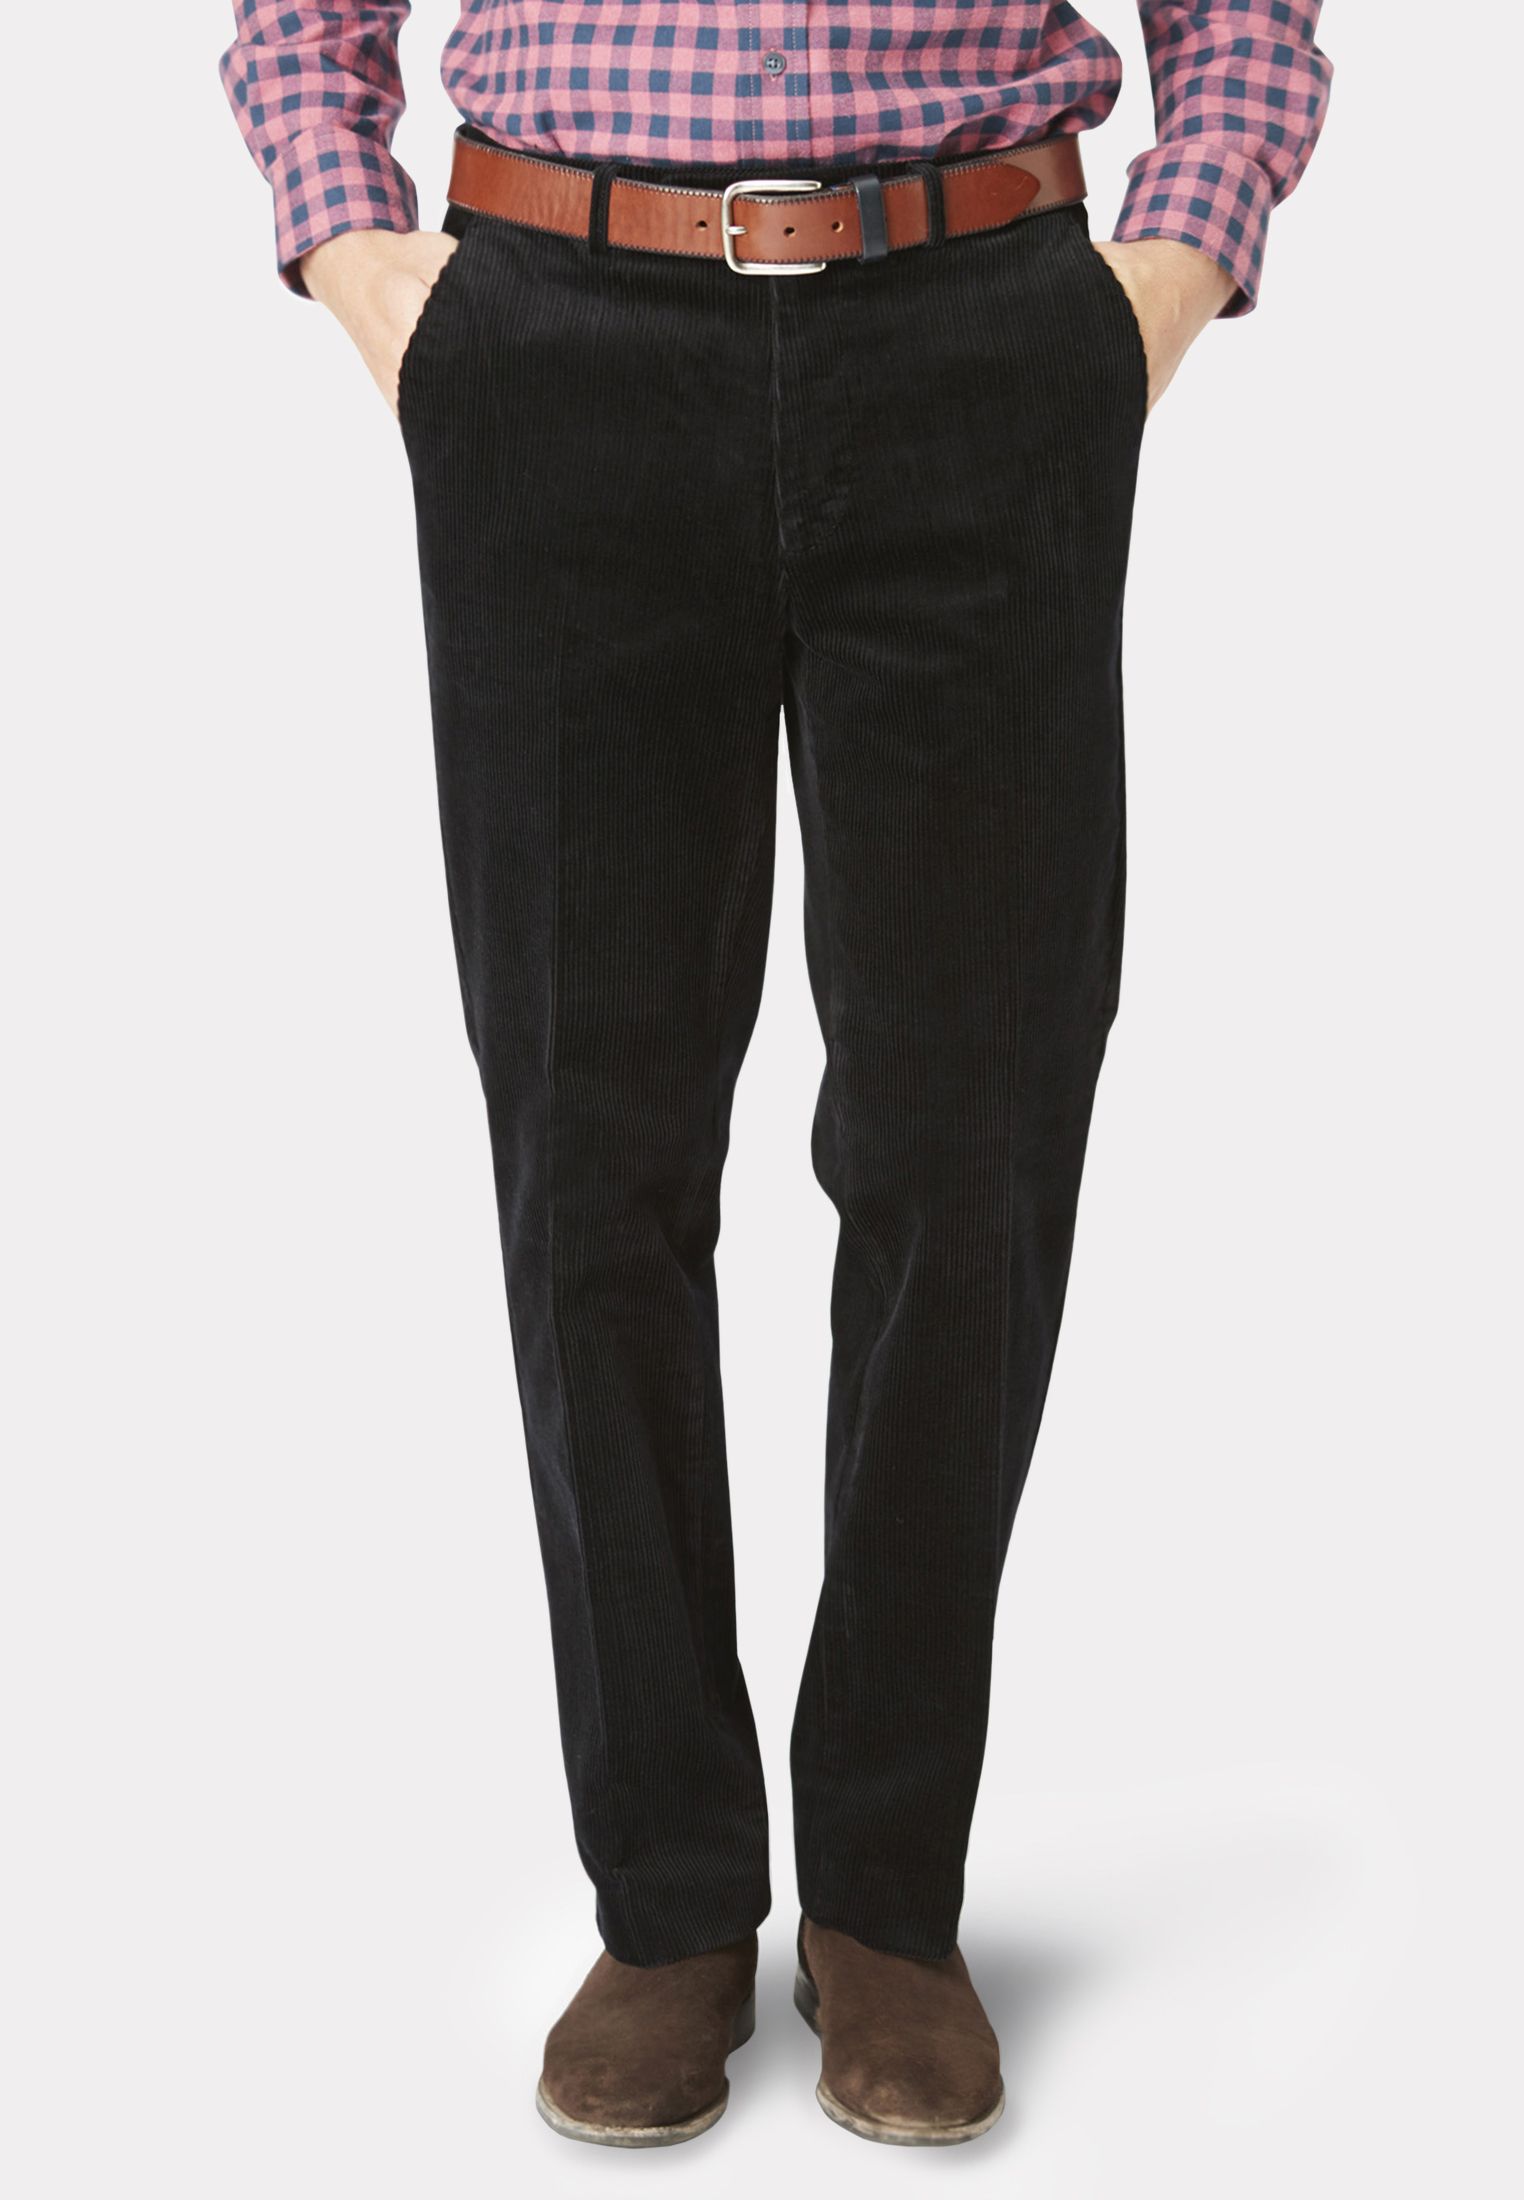 Express, Stylist Super High Waisted Pleated Pant in Bright Kelly